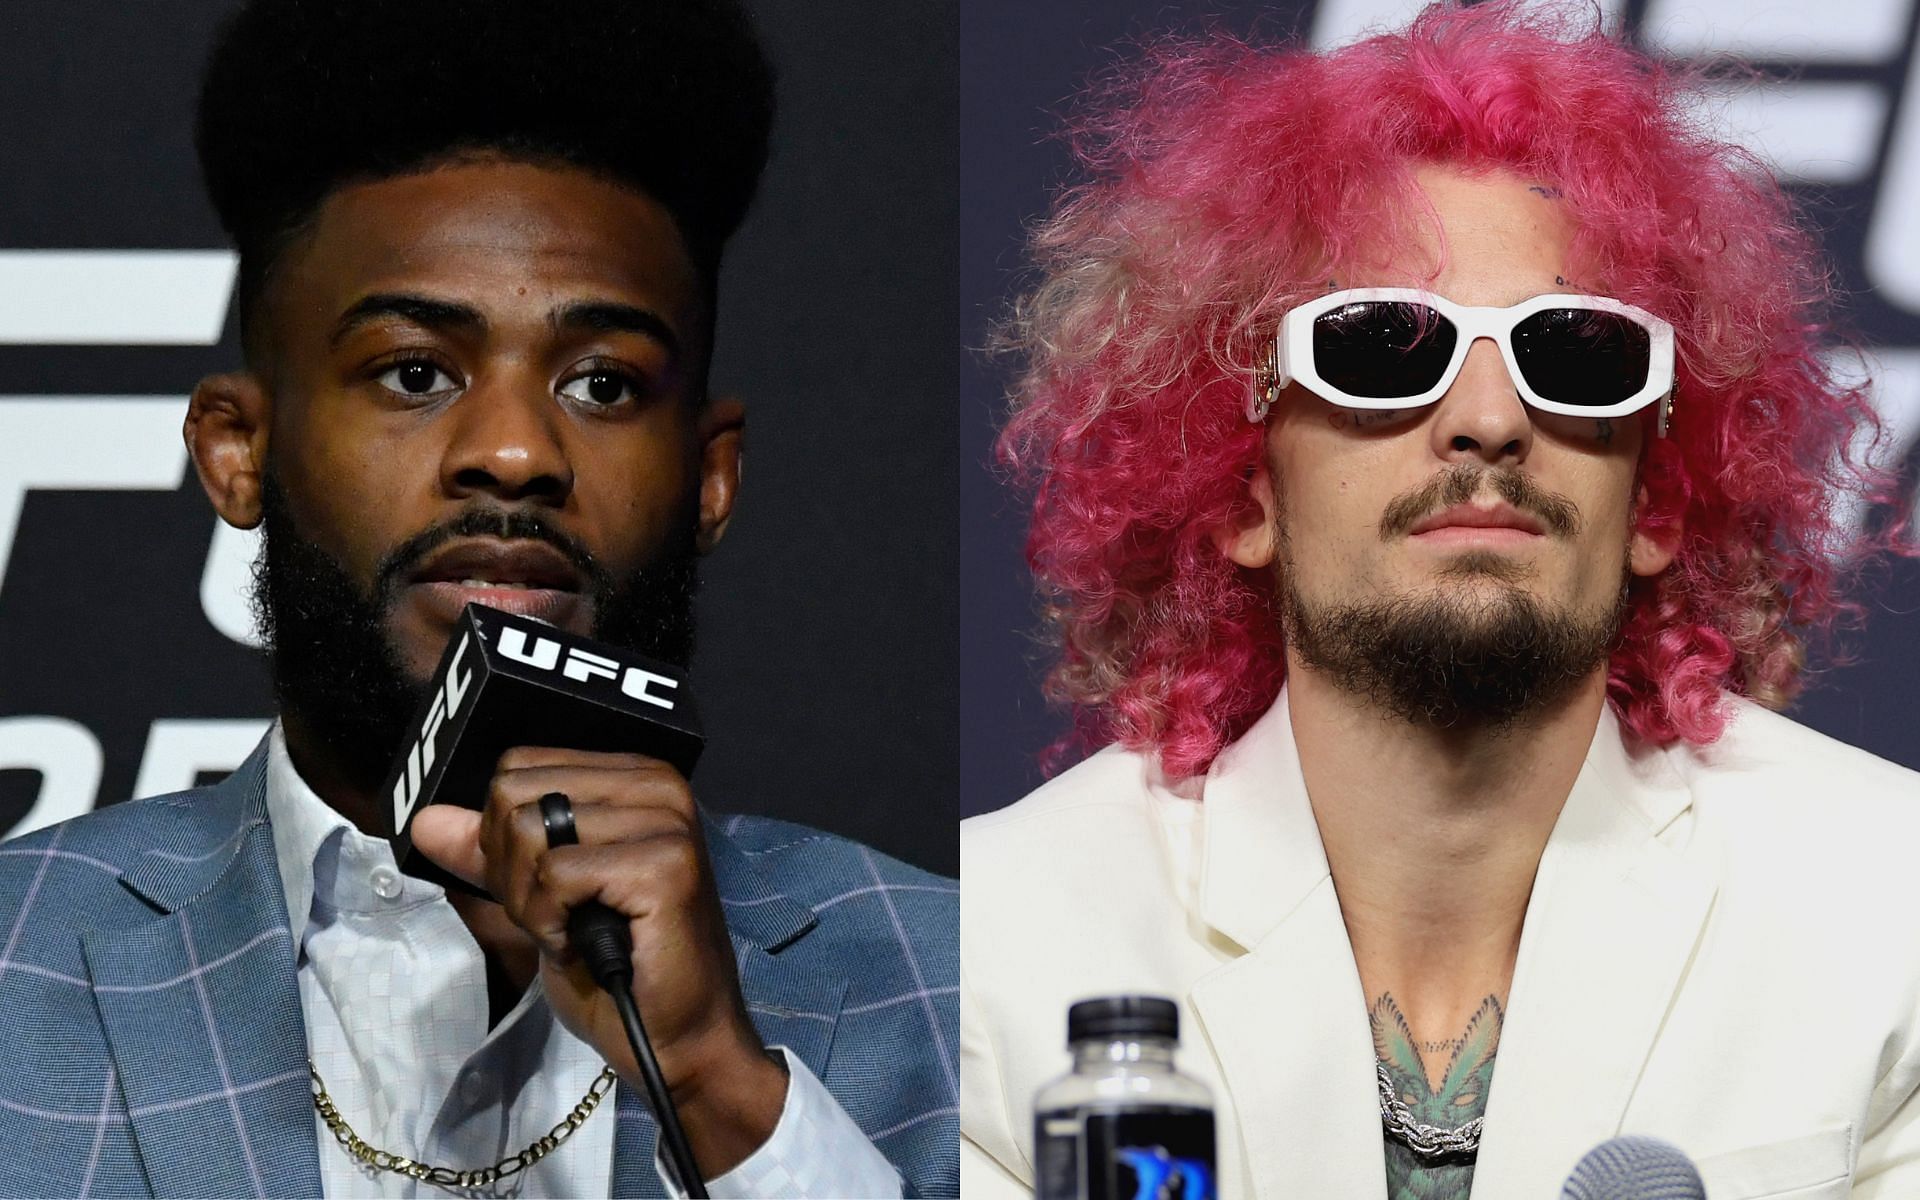 Bantamweight champion Aljamain Sterling tries to start title fight discussions with No. 1 contender ‘Sugar’ Sean O’Malley after UFC 280